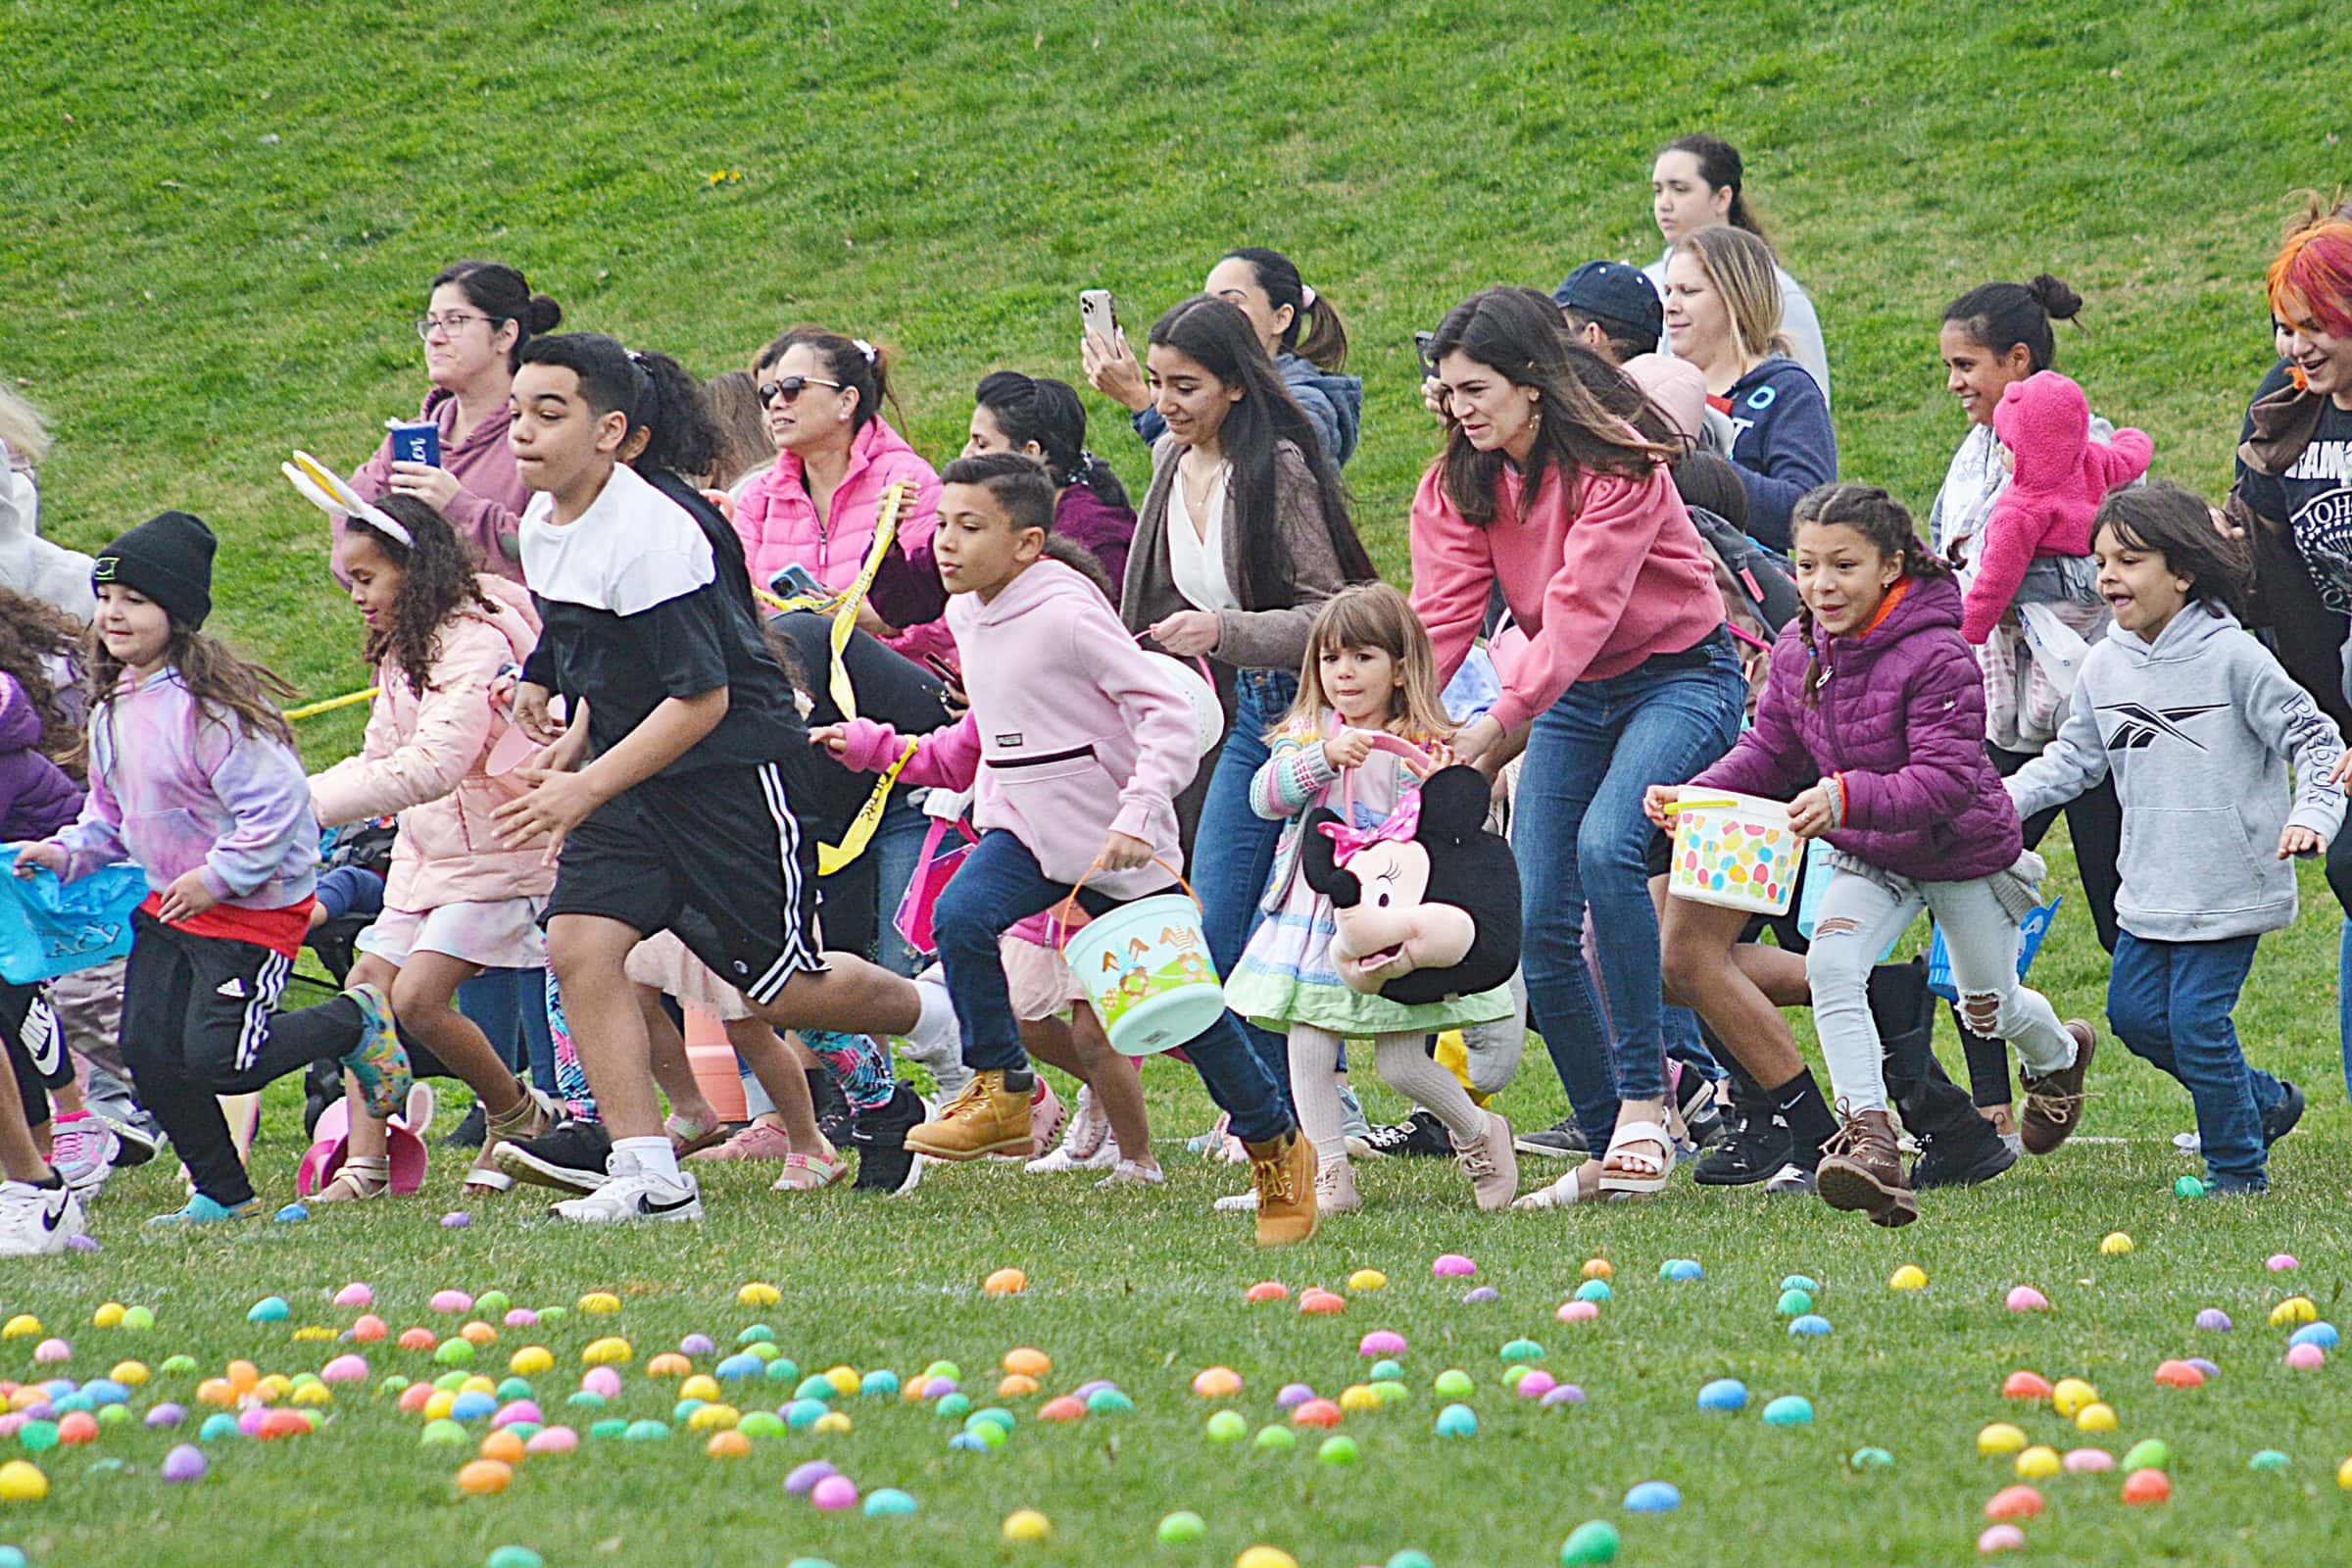 Greek bake sale to egg hunt: Five things to do this weekend